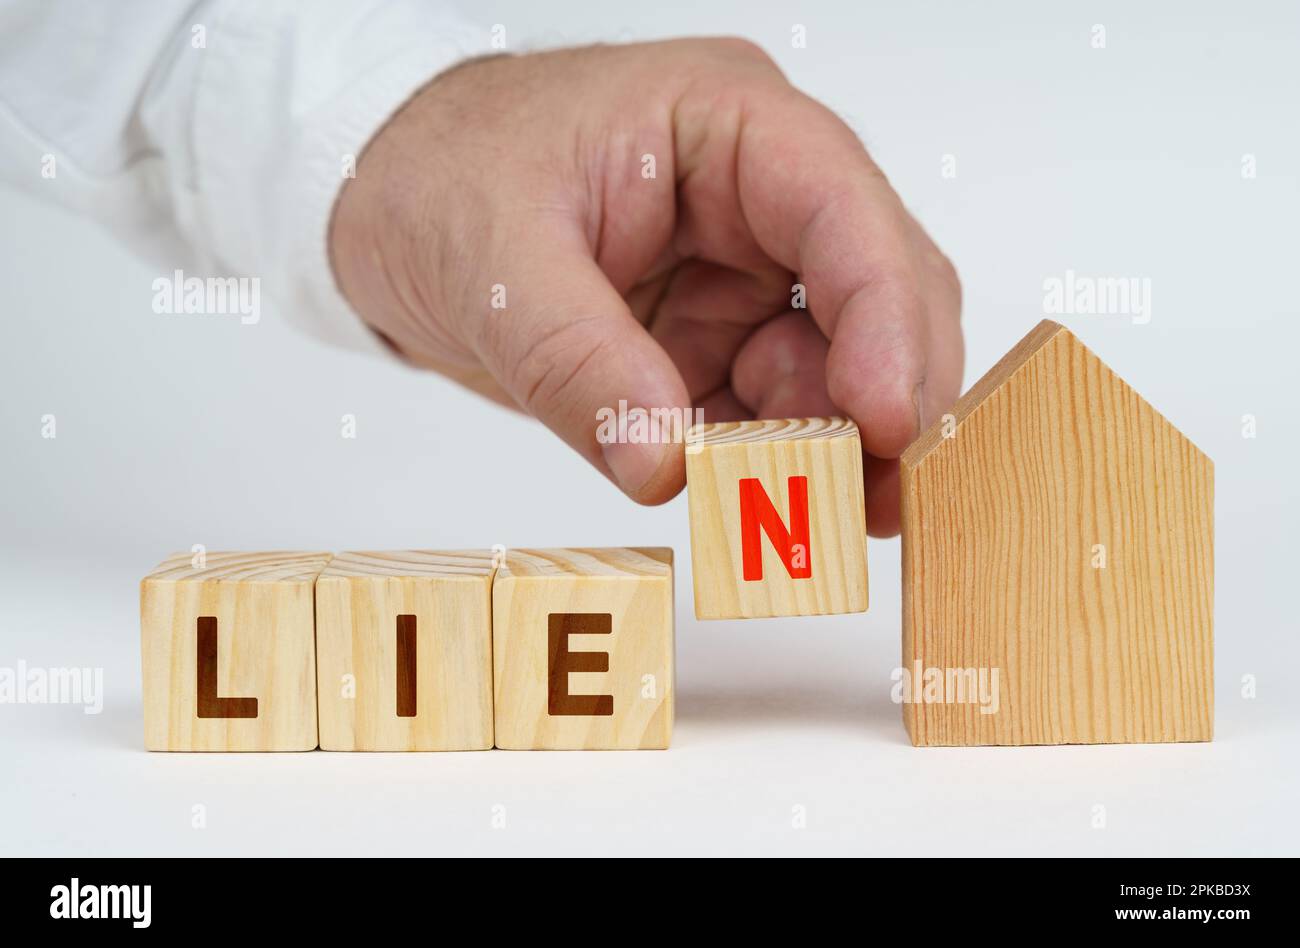 Real estate concept. On a white surface there is a model of a house, next to it a man has placed cubes with the inscription - LIEN Stock Photo